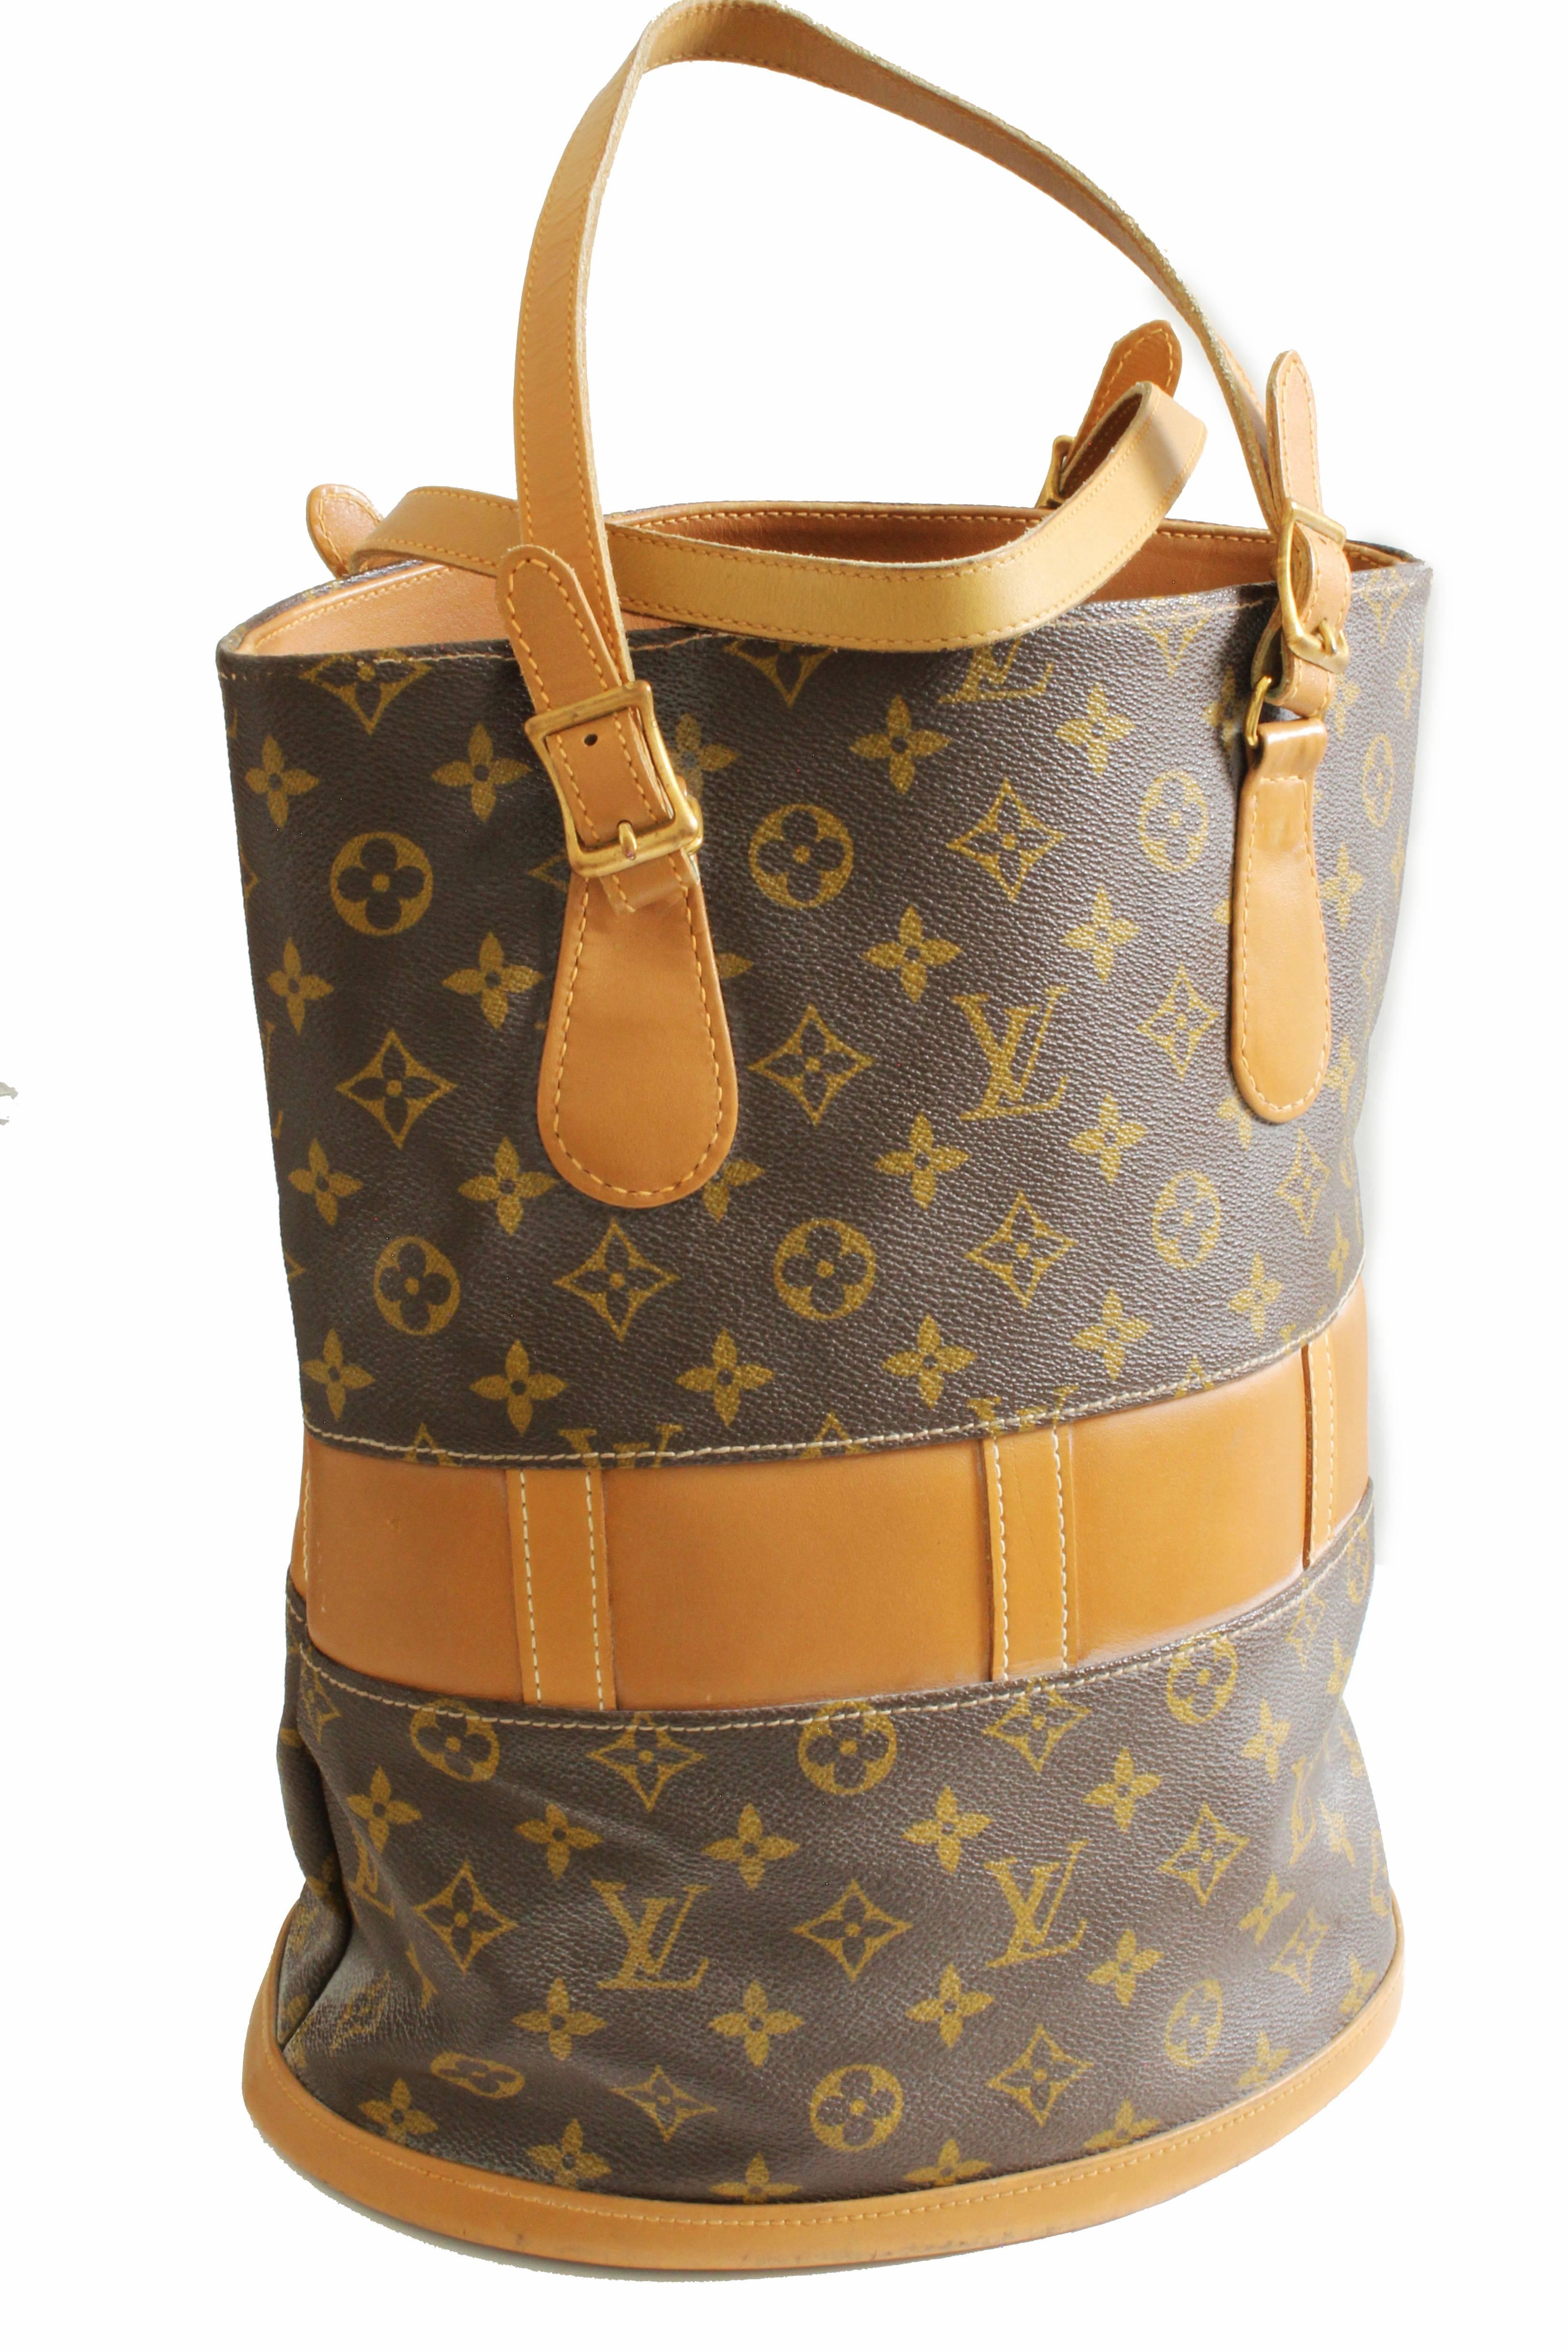 Brown Louis Vuitton by The French Co Monogram Bucket Bag Tote and Coin Purse, 1970s